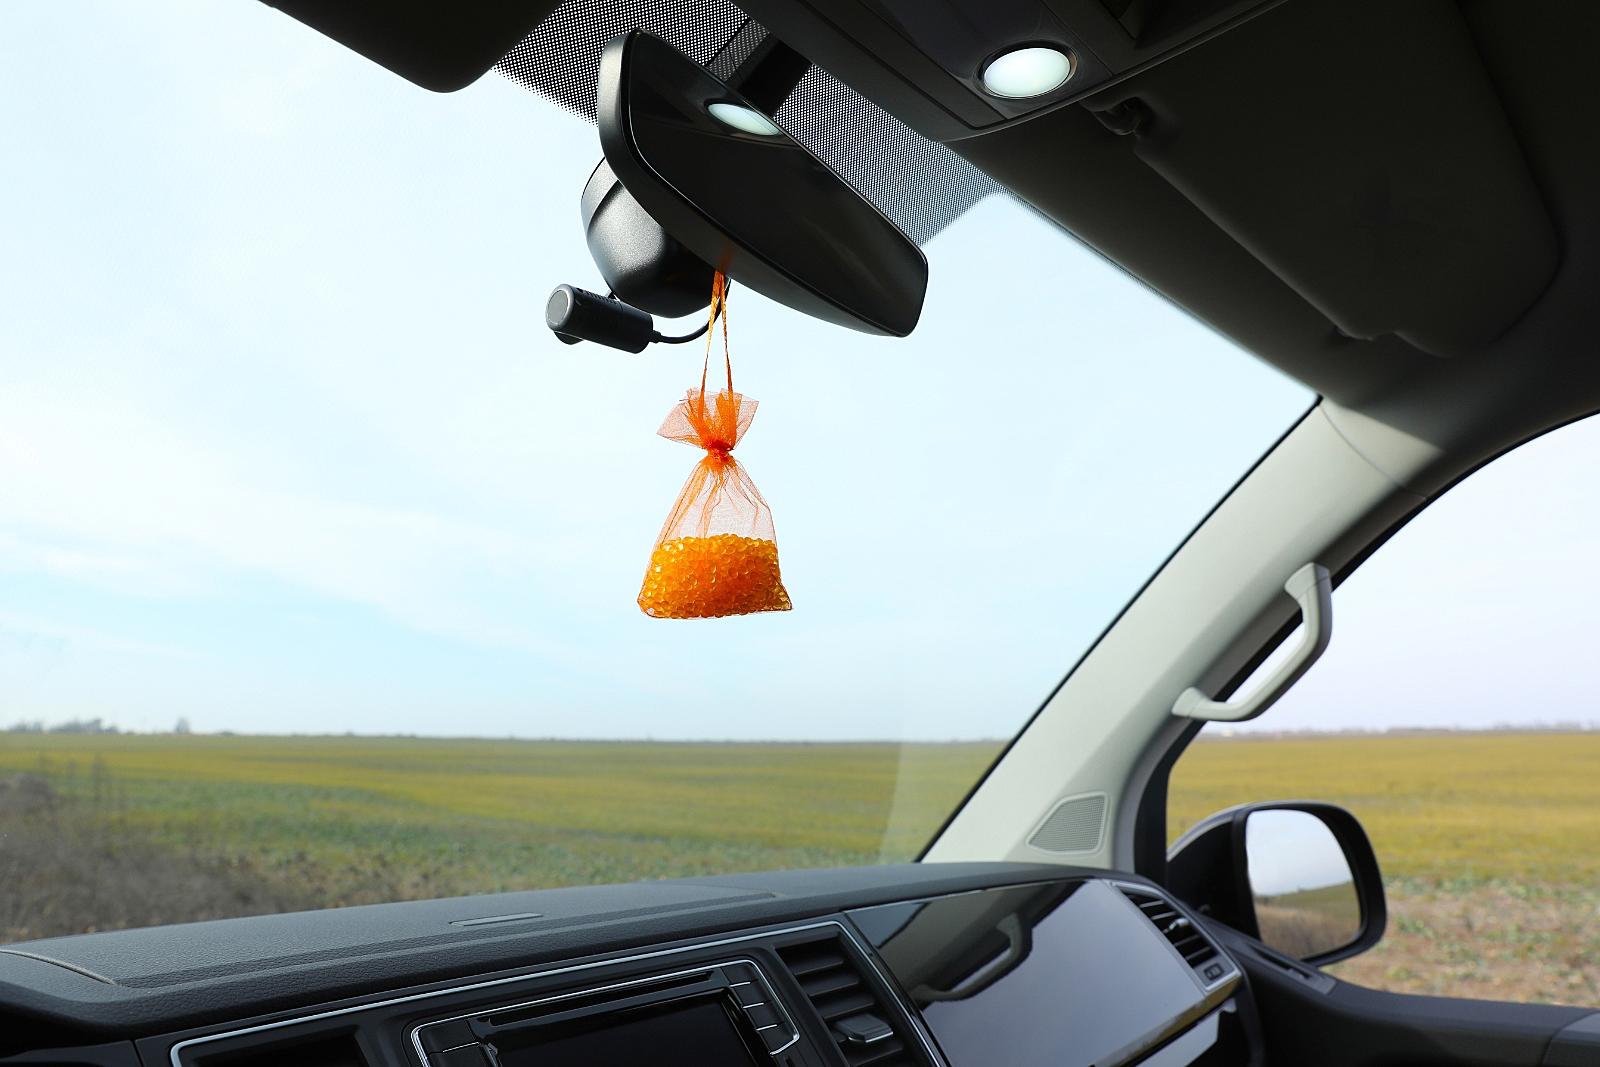 Are objects hanging from your rearview mirror illegal in Michigan?